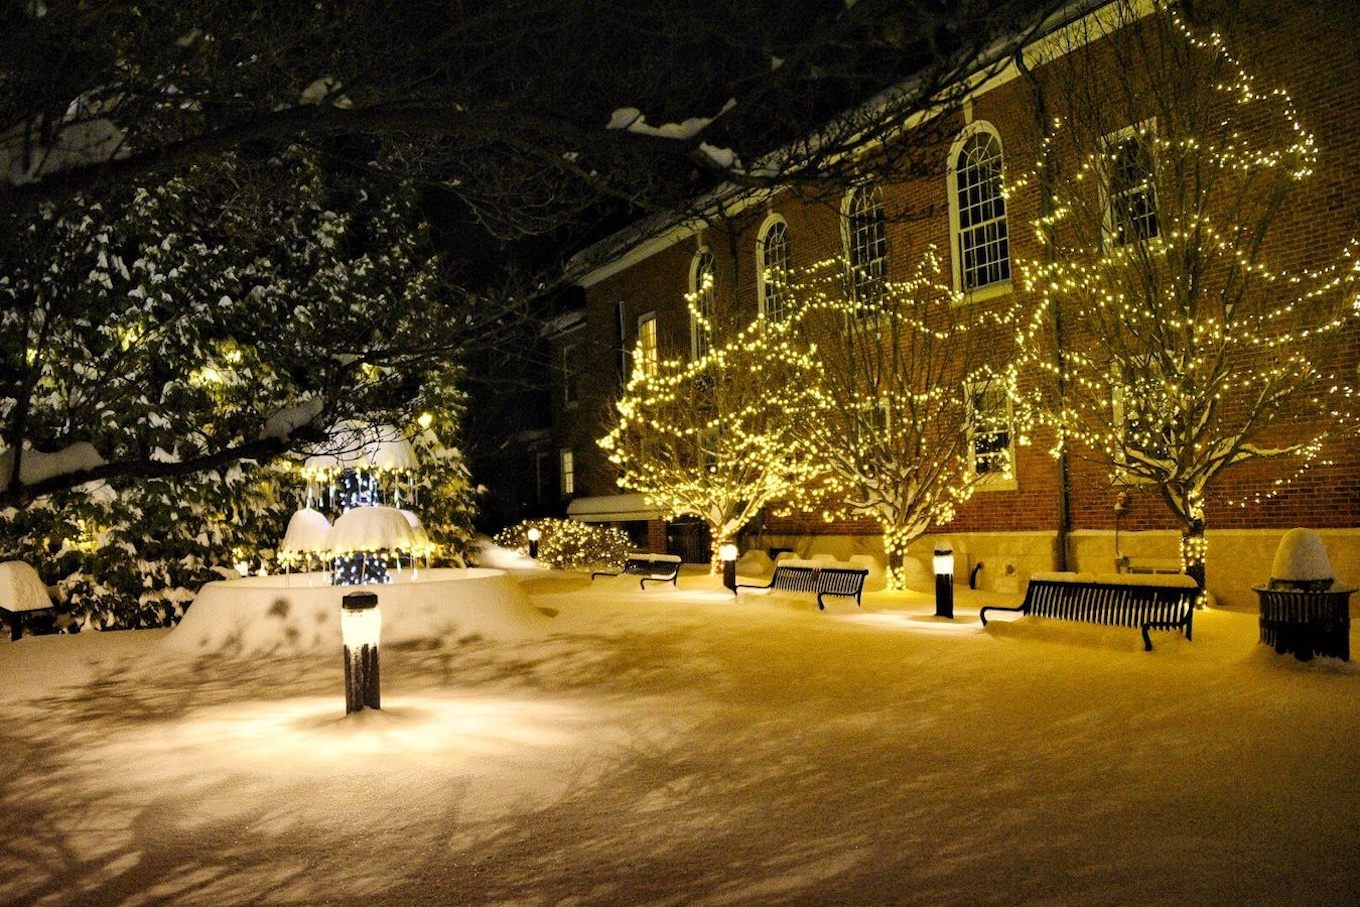 A downtown building covered with snow at night, with benches and trees showing implied lines.